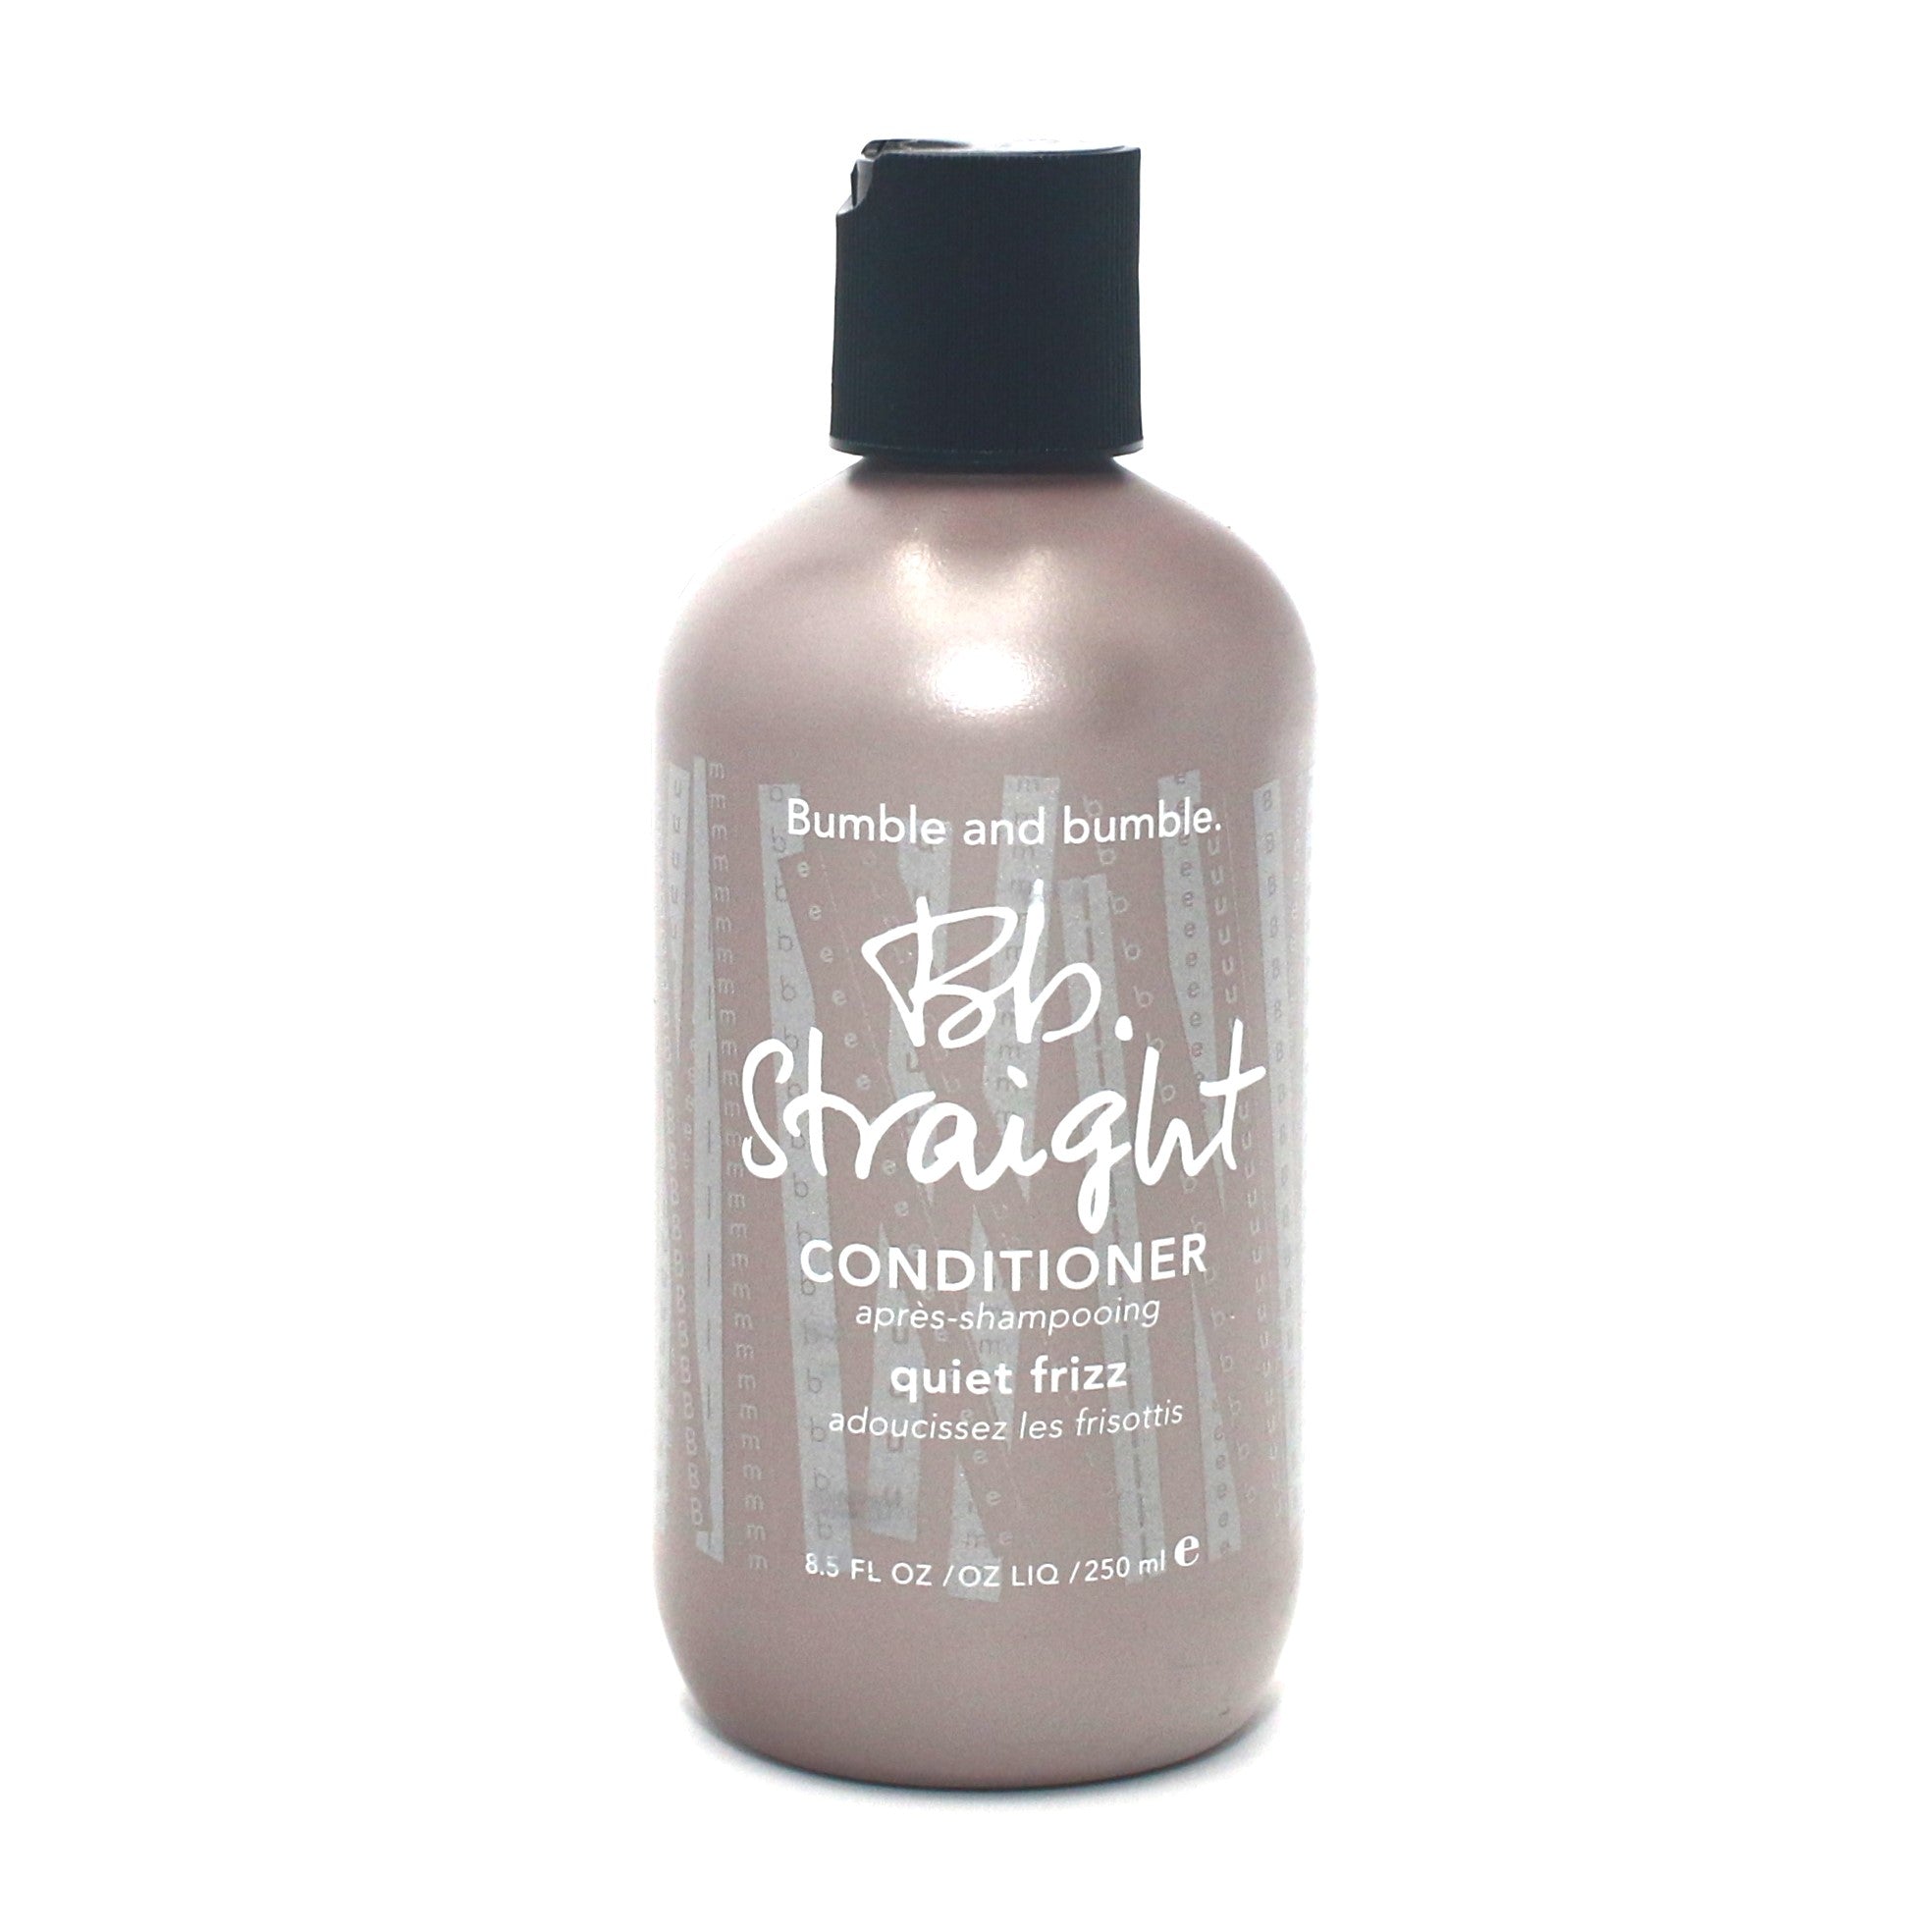 Bumble and bumble Bb Straight Conditioner 8.5 oz